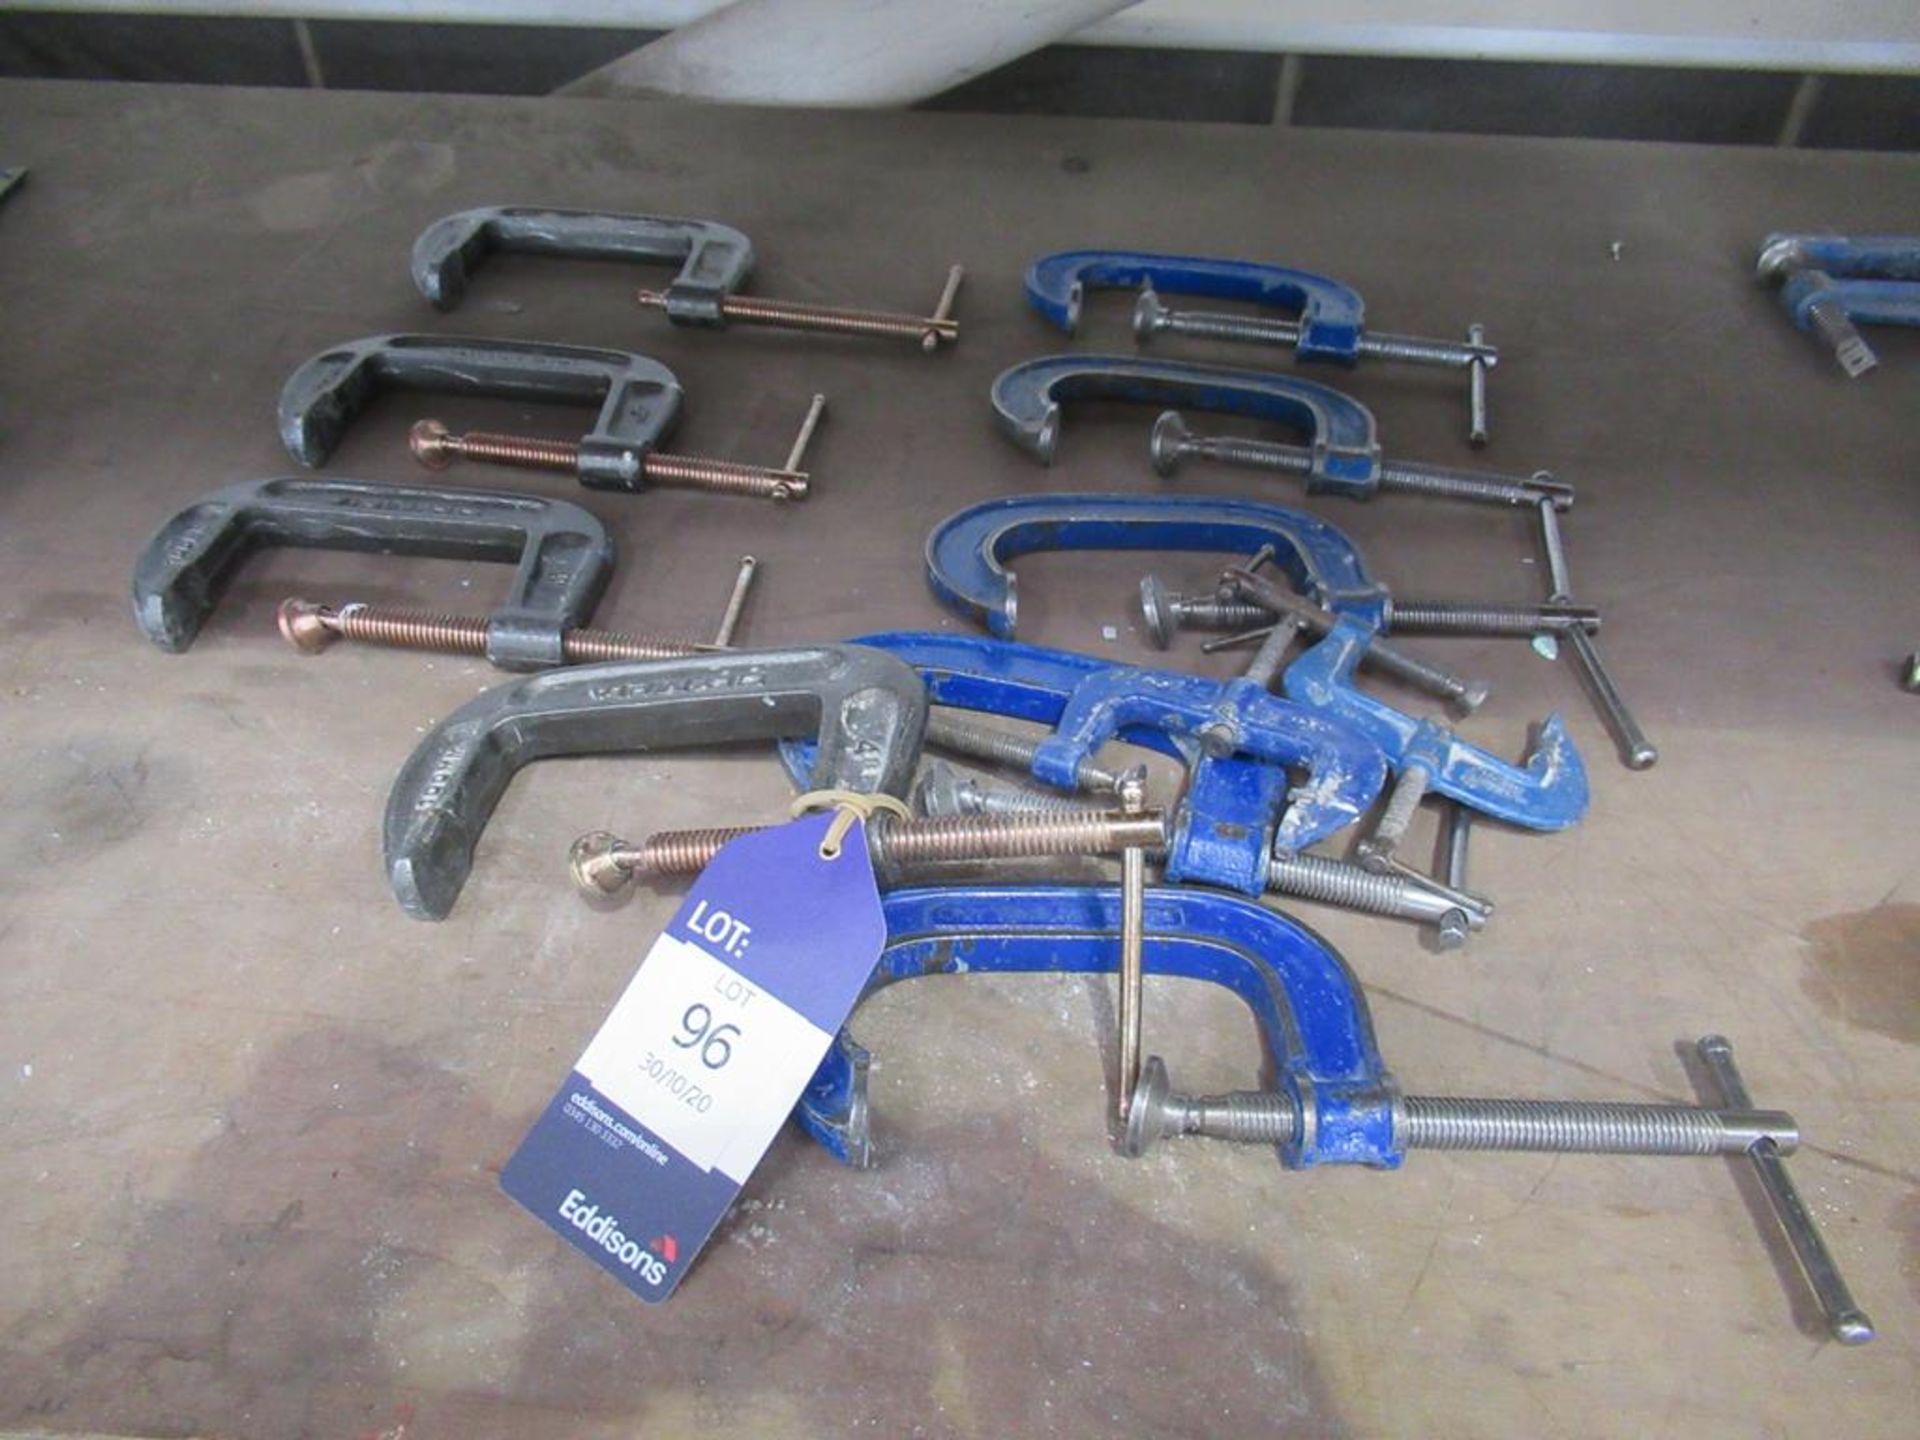 Quantity of Spring Clamps in Plastic Crate - Image 3 of 3